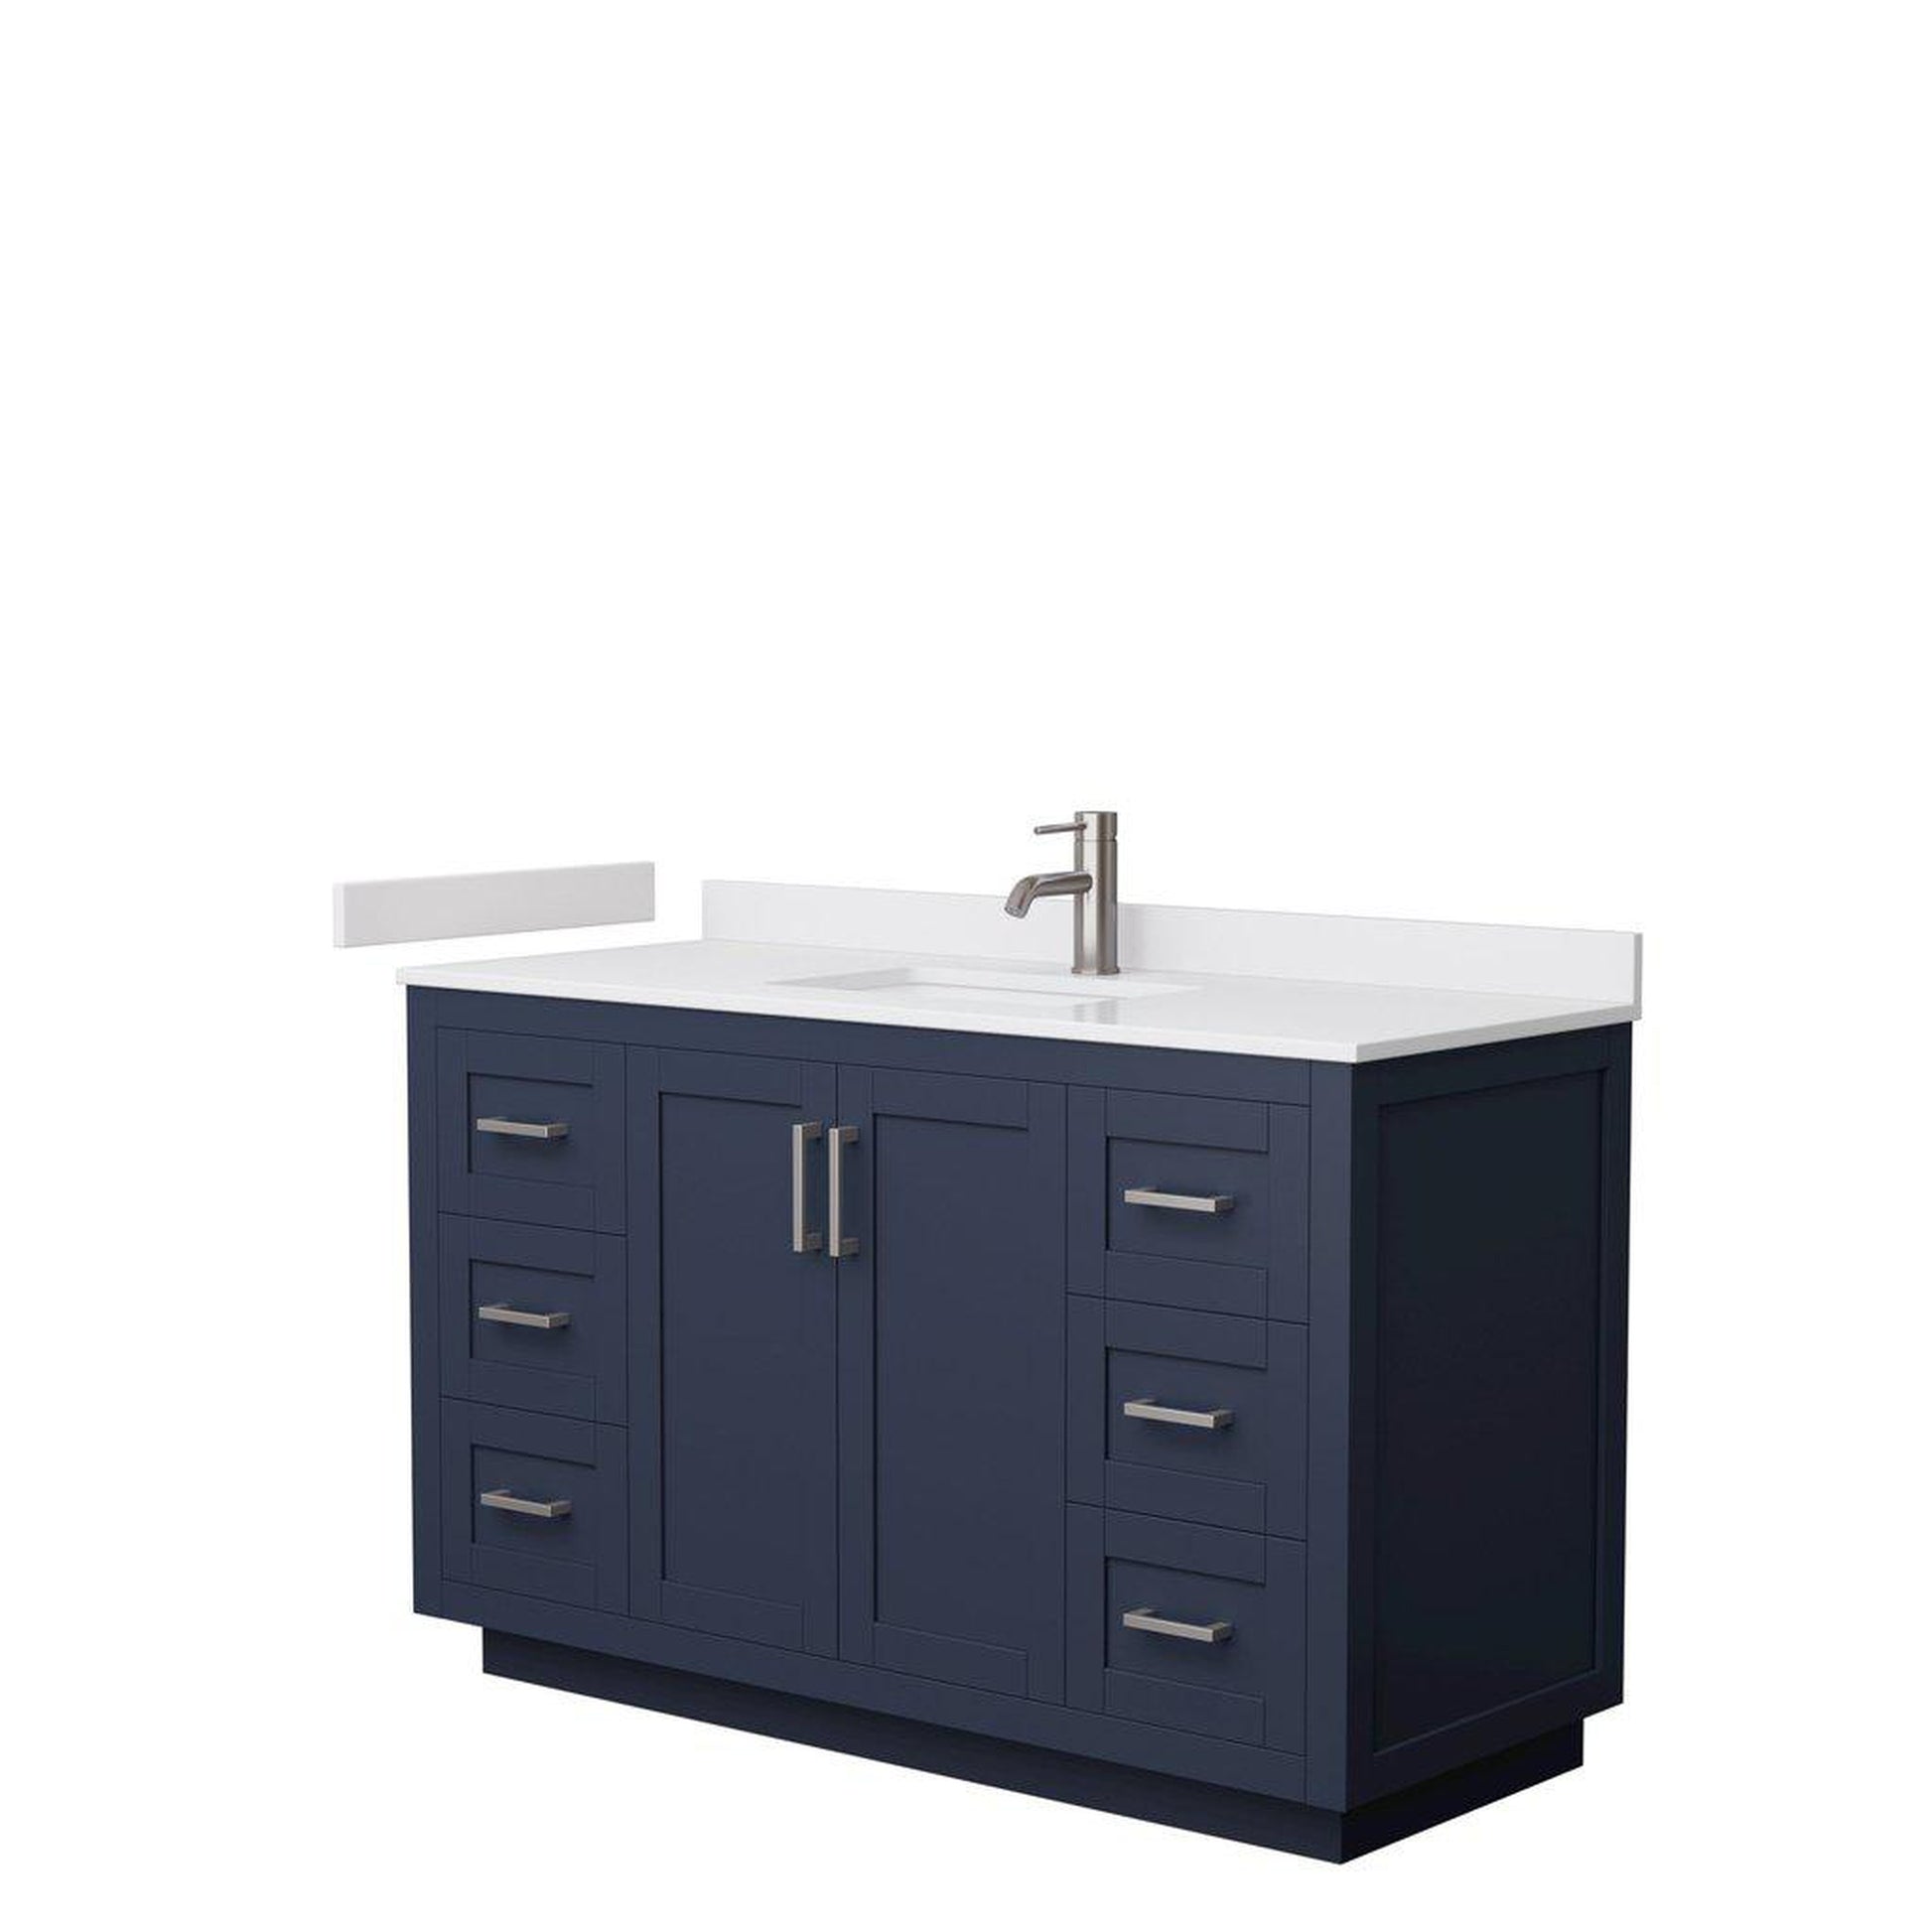 Wyndham Collection Miranda 54" Single Bathroom Dark Blue Vanity Set With White Cultured Marble Countertop, Undermount Square Sink, And Brushed Nickel Trim